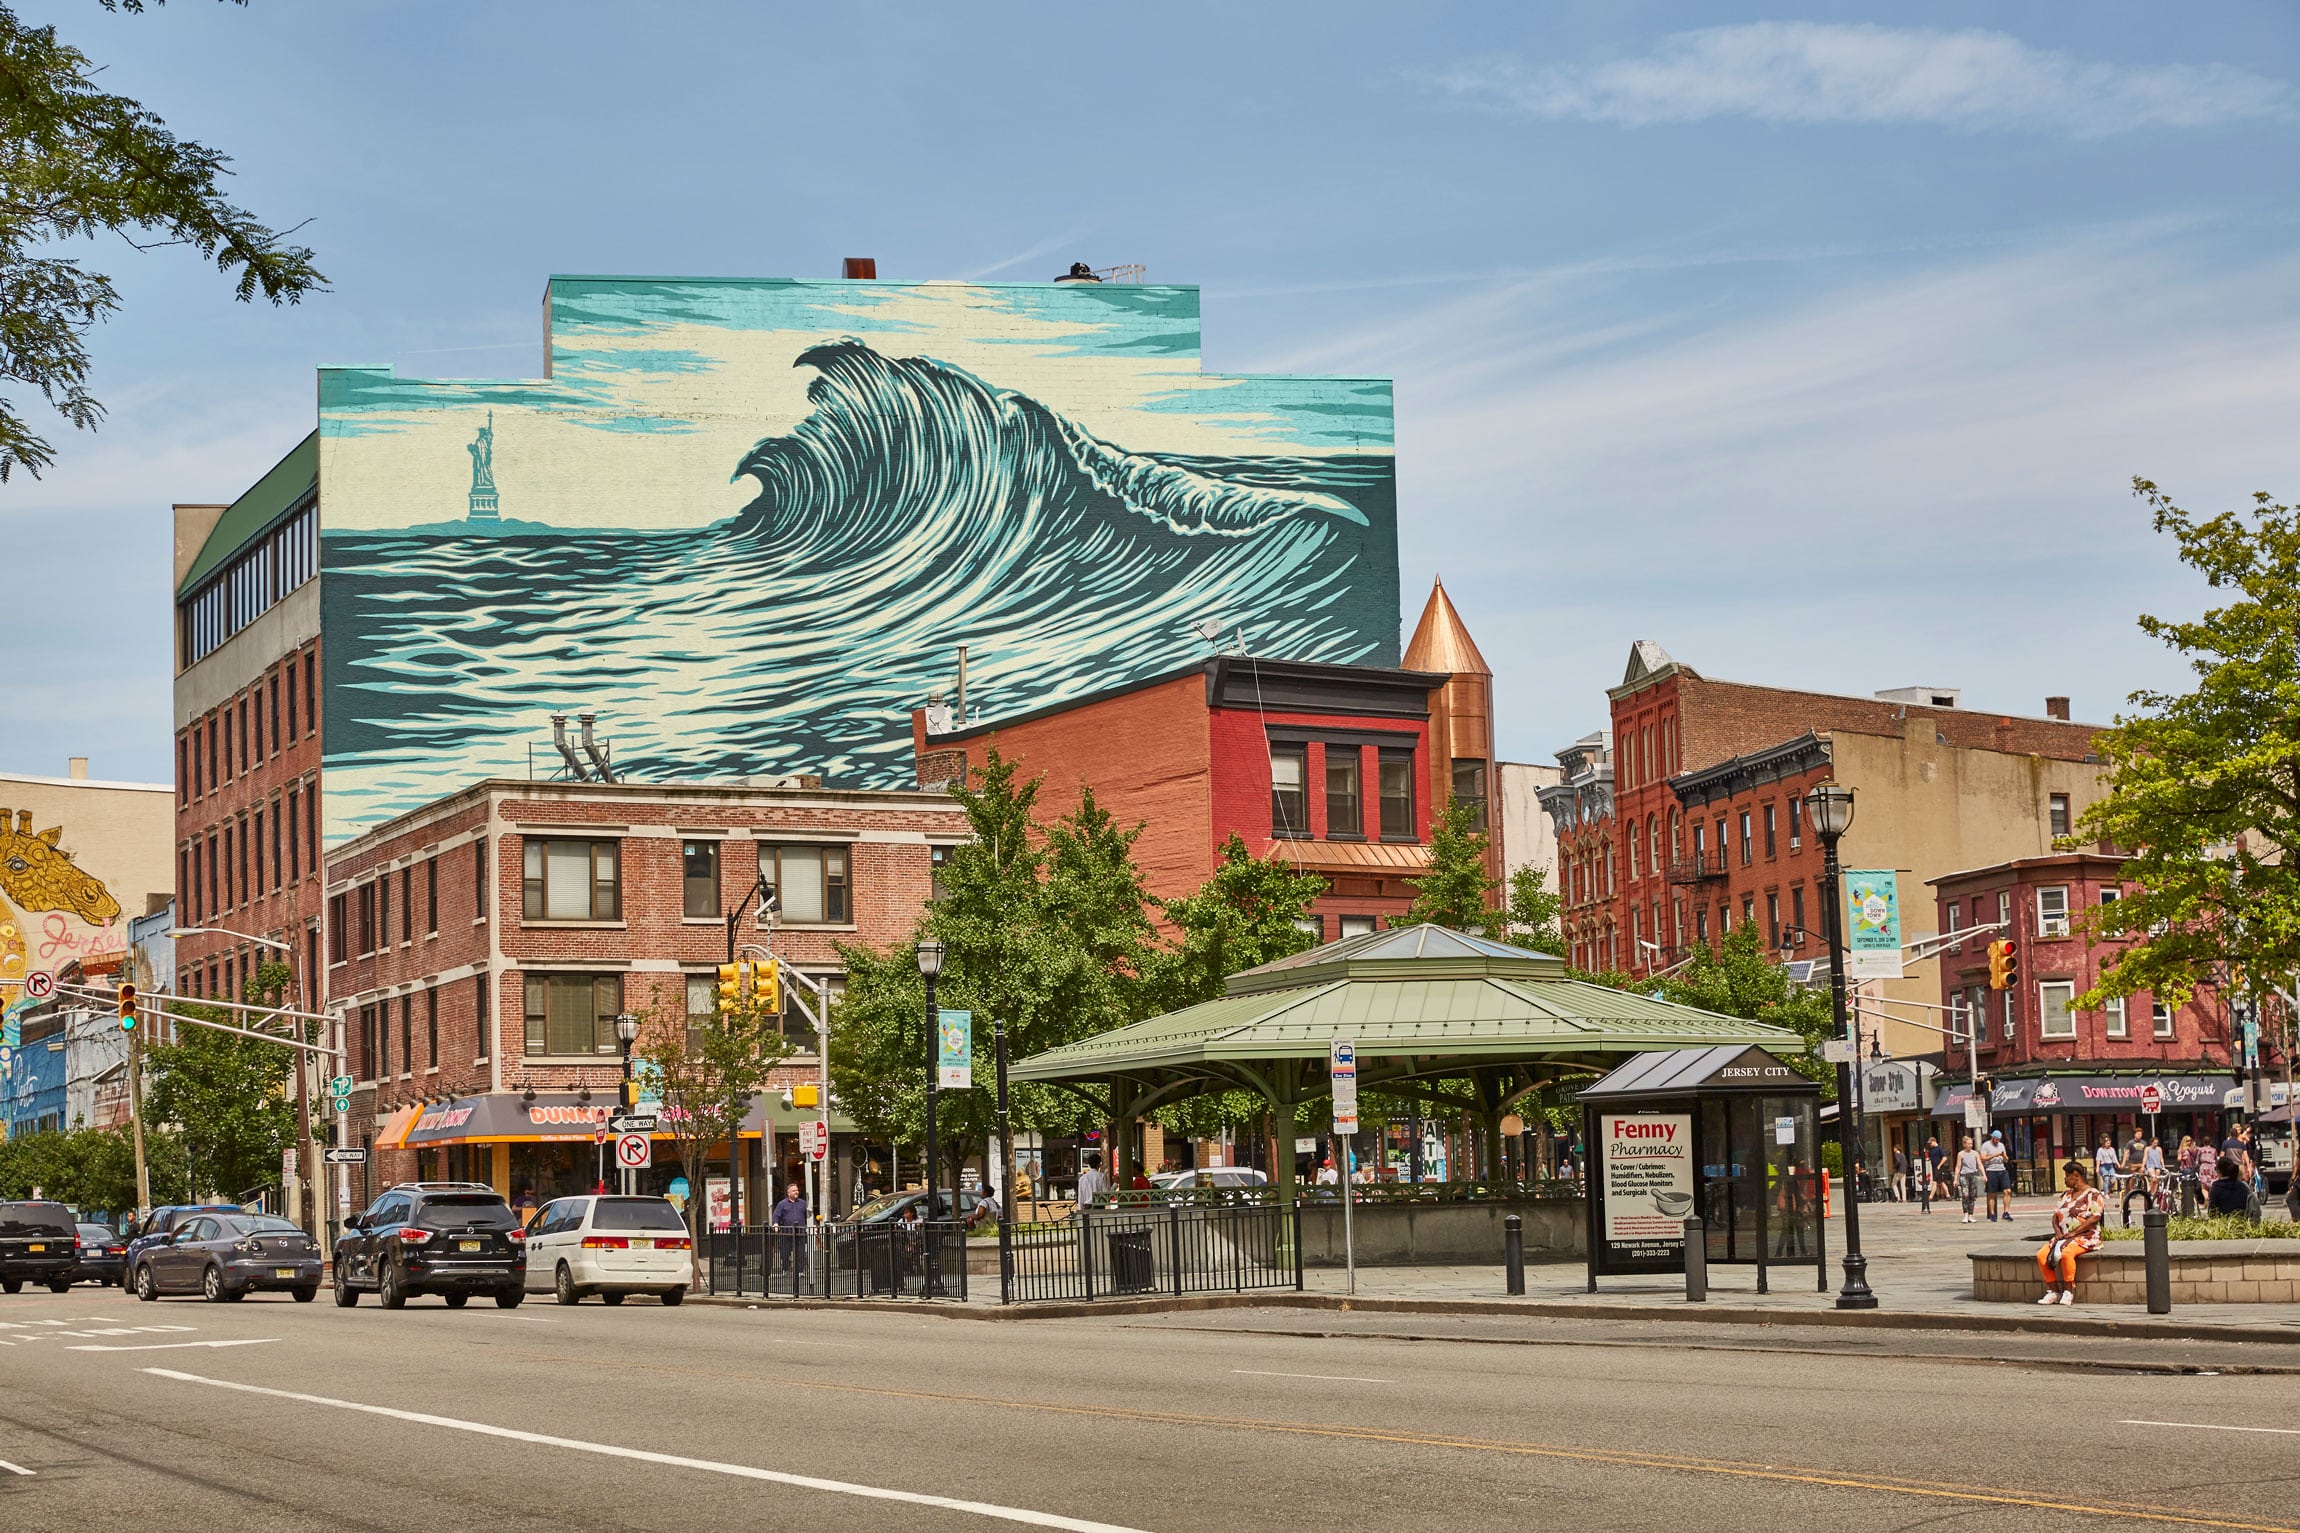 Street view of brick buildings in the city with a large mural of a wave above